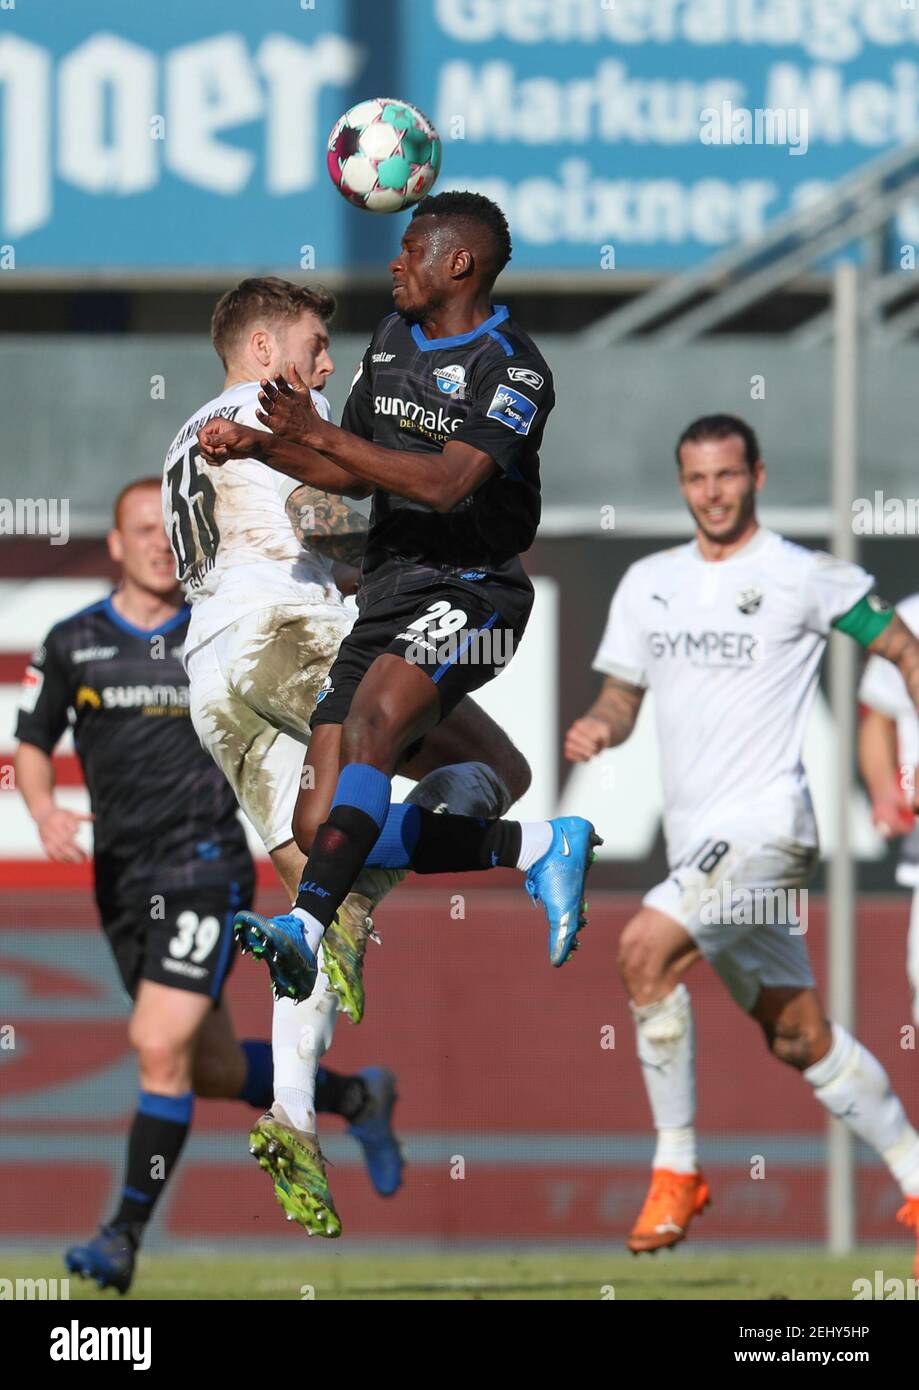 20 February 2021, North Rhine-Westphalia, Paderborn: Football: 2. Bundesliga, SC Paderborn 07 - SV Sandhausen, Matchday 22 at Benteler-Arena. Paderborn's Jamilu Collins (r) battles for the ball with Sandhausen's Alexander Esswein (l). Photo: Friso Gentsch/dpa - IMPORTANT NOTE: In accordance with the regulations of the DFL Deutsche Fußball Liga and/or the DFB Deutscher Fußball-Bund, it is prohibited to use or have used photographs taken in the stadium and/or of the match in the form of sequence pictures and/or video-like photo series. Stock Photo